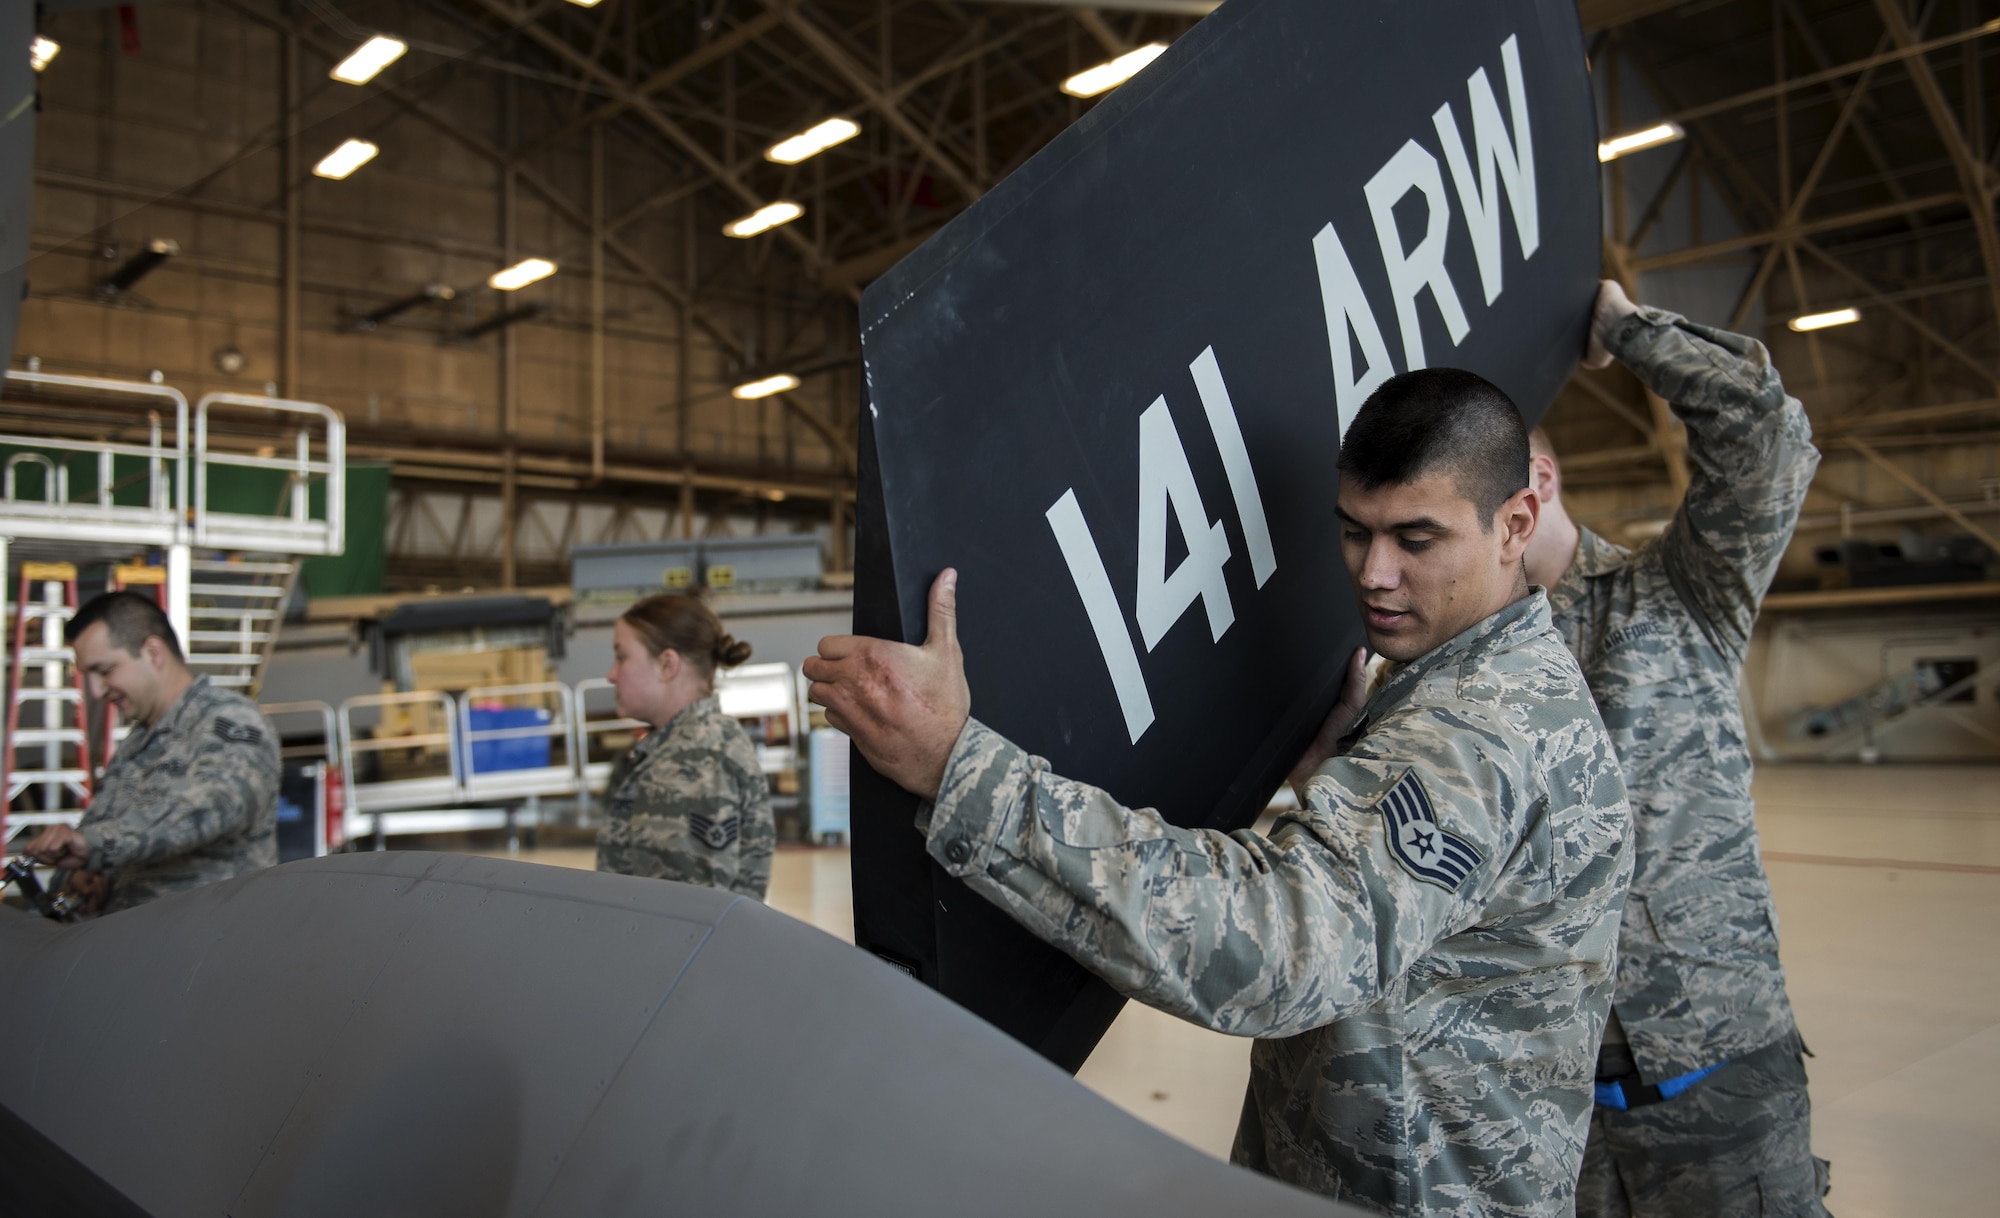 Staff Sgt. Anthony Landin, 92nd Maintenance Squadron hydraulics system craftsman, and Airman 1st Class Tage Sickler 92nd MXS hydraulics systems apprentice, install a ruddervator Dec. 16, 2016, at Fairchild Air Force Base, Wash. If any of the parts located in the ruddervator control system are installed improperly, there is the possibility of damaging the entire boom. (U.S. Air Force photo/ Airman 1st Class Sean Campbell)